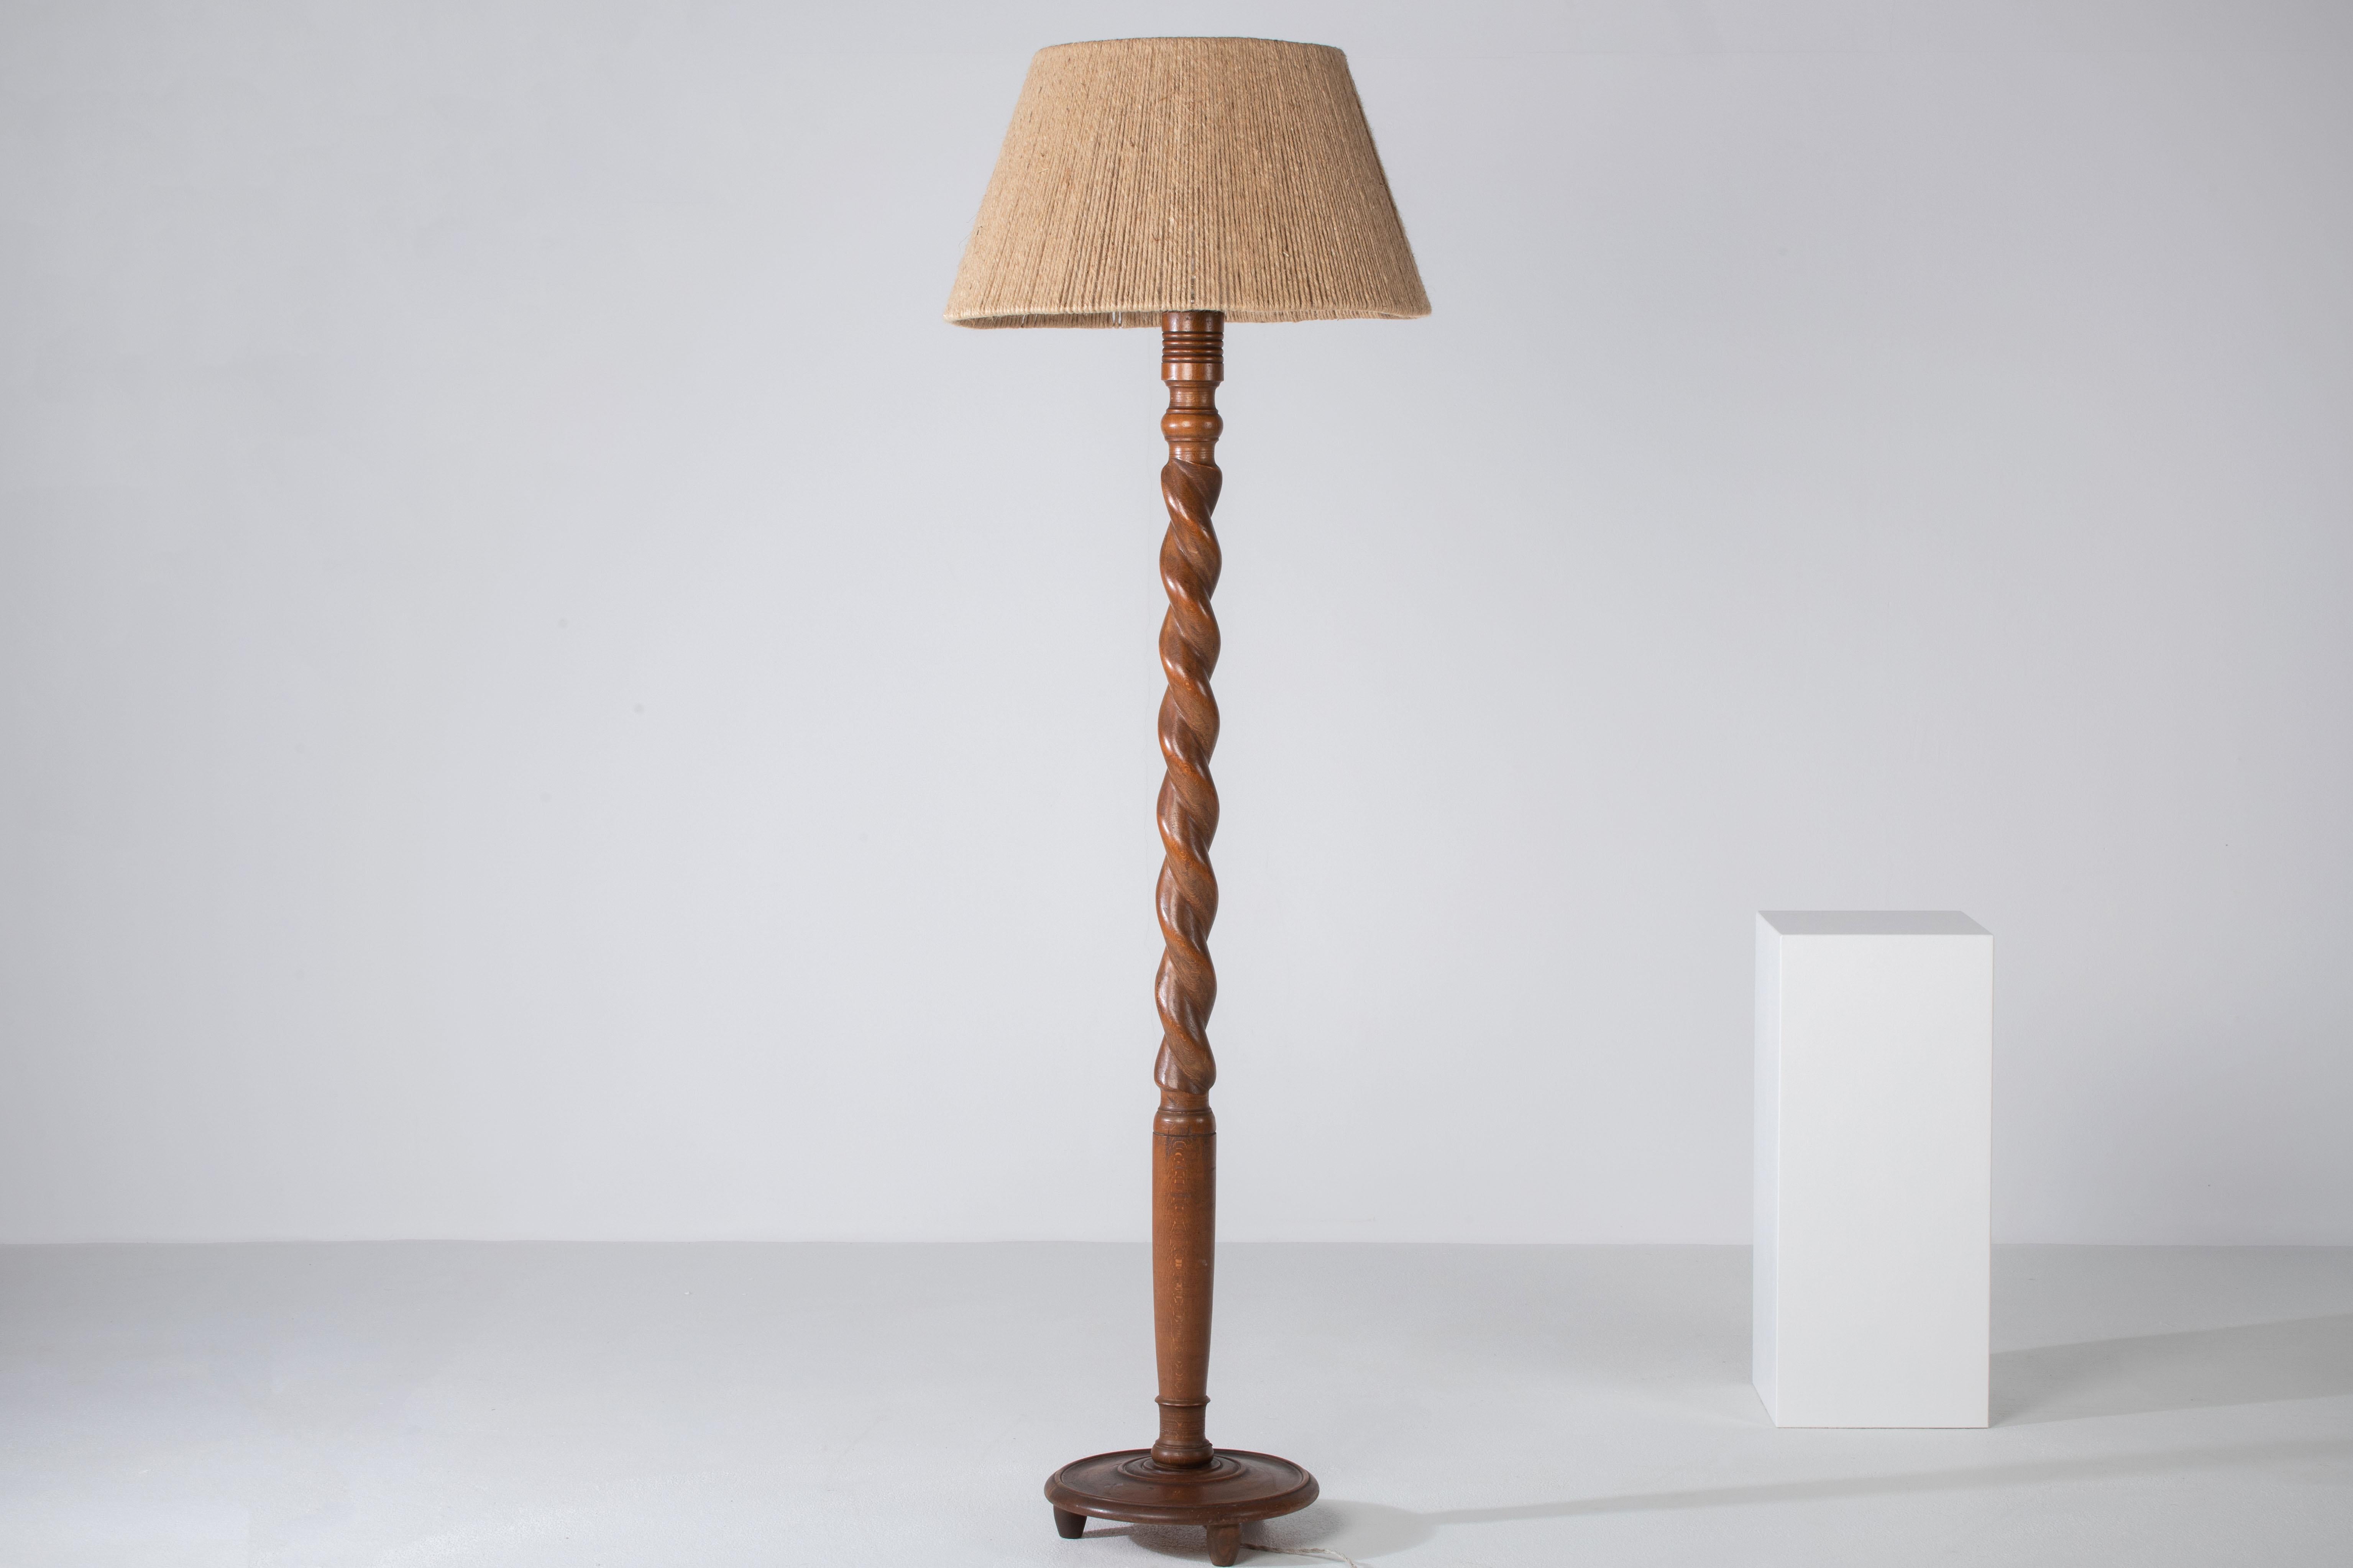 Twisted Oak Floor Lamp with Rope Lampshade, France 1940 For Sale 4